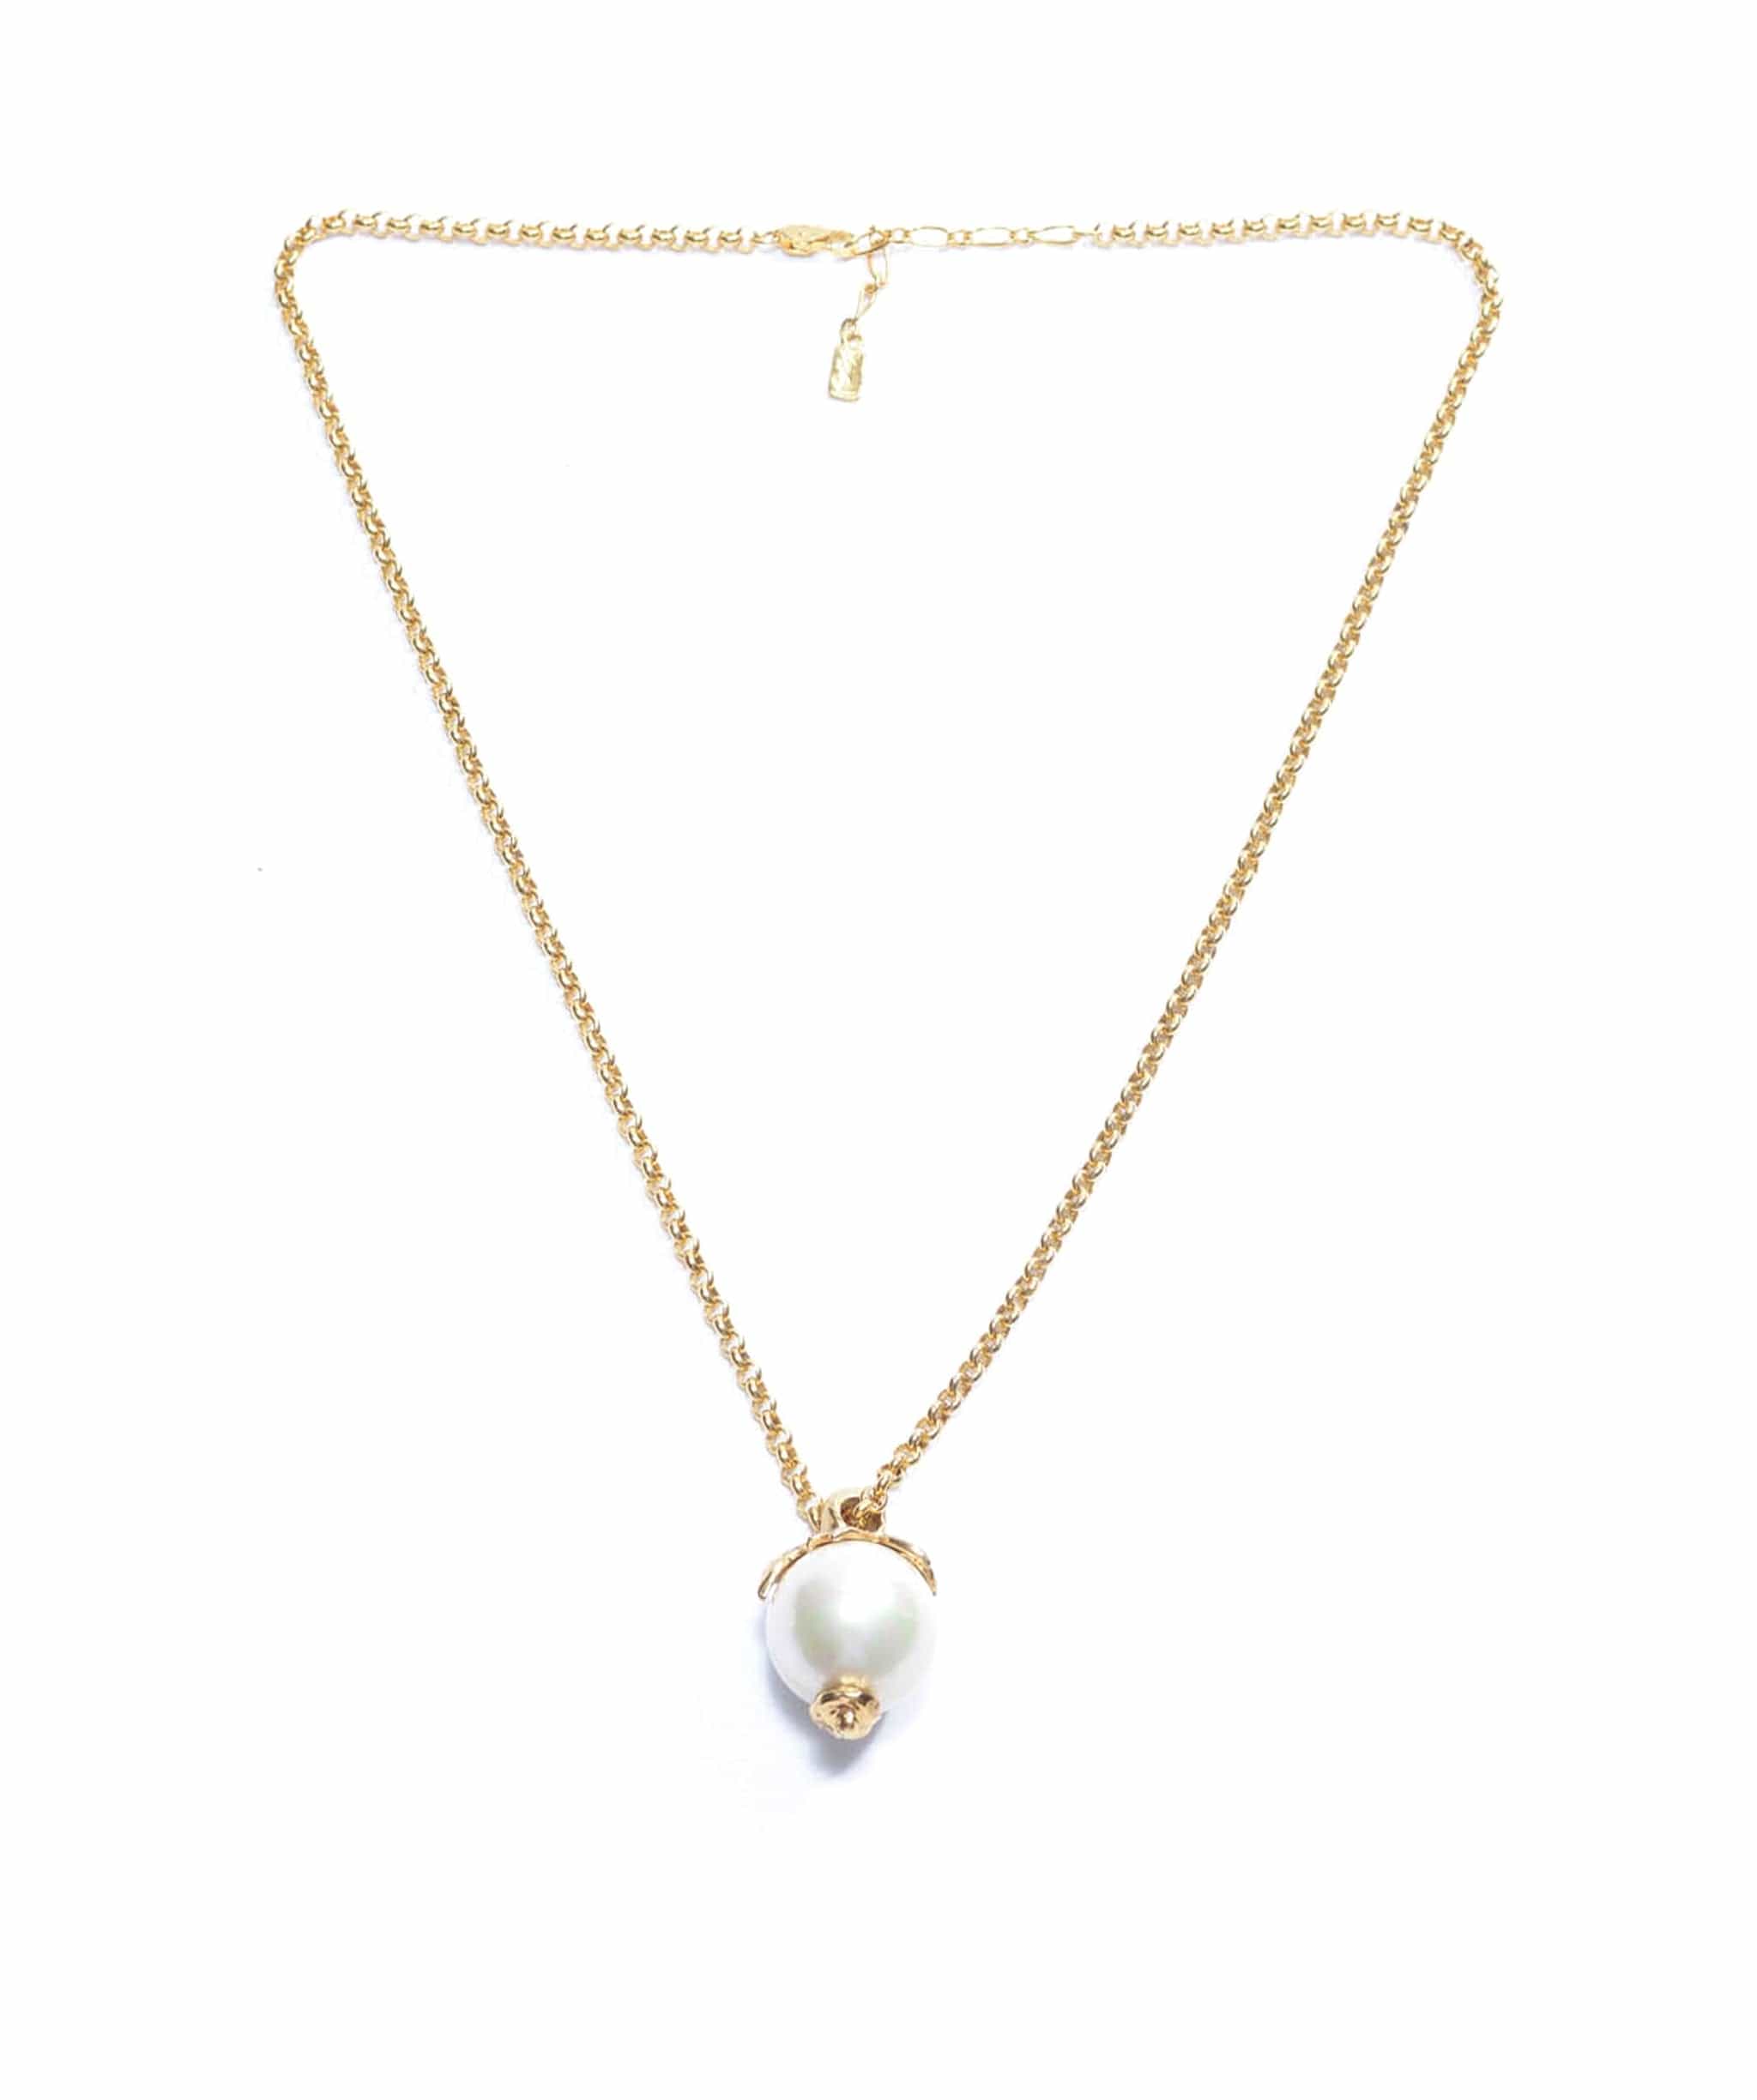 Yves Saint Laurent YSL large pearl necklace - AWC1713